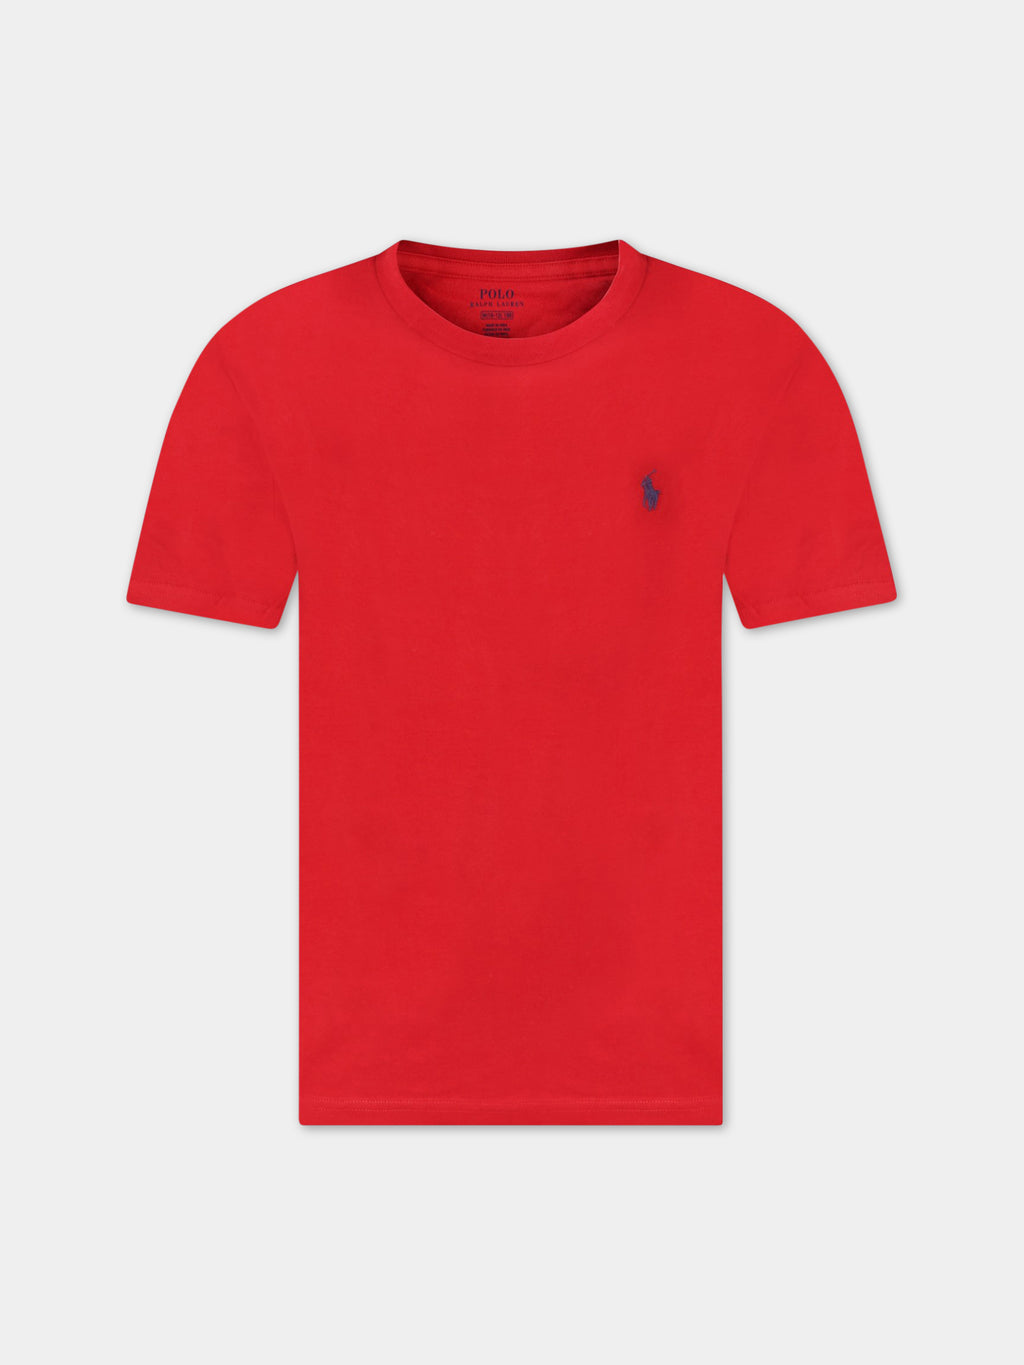 Red t-shirt for boy with pony logo